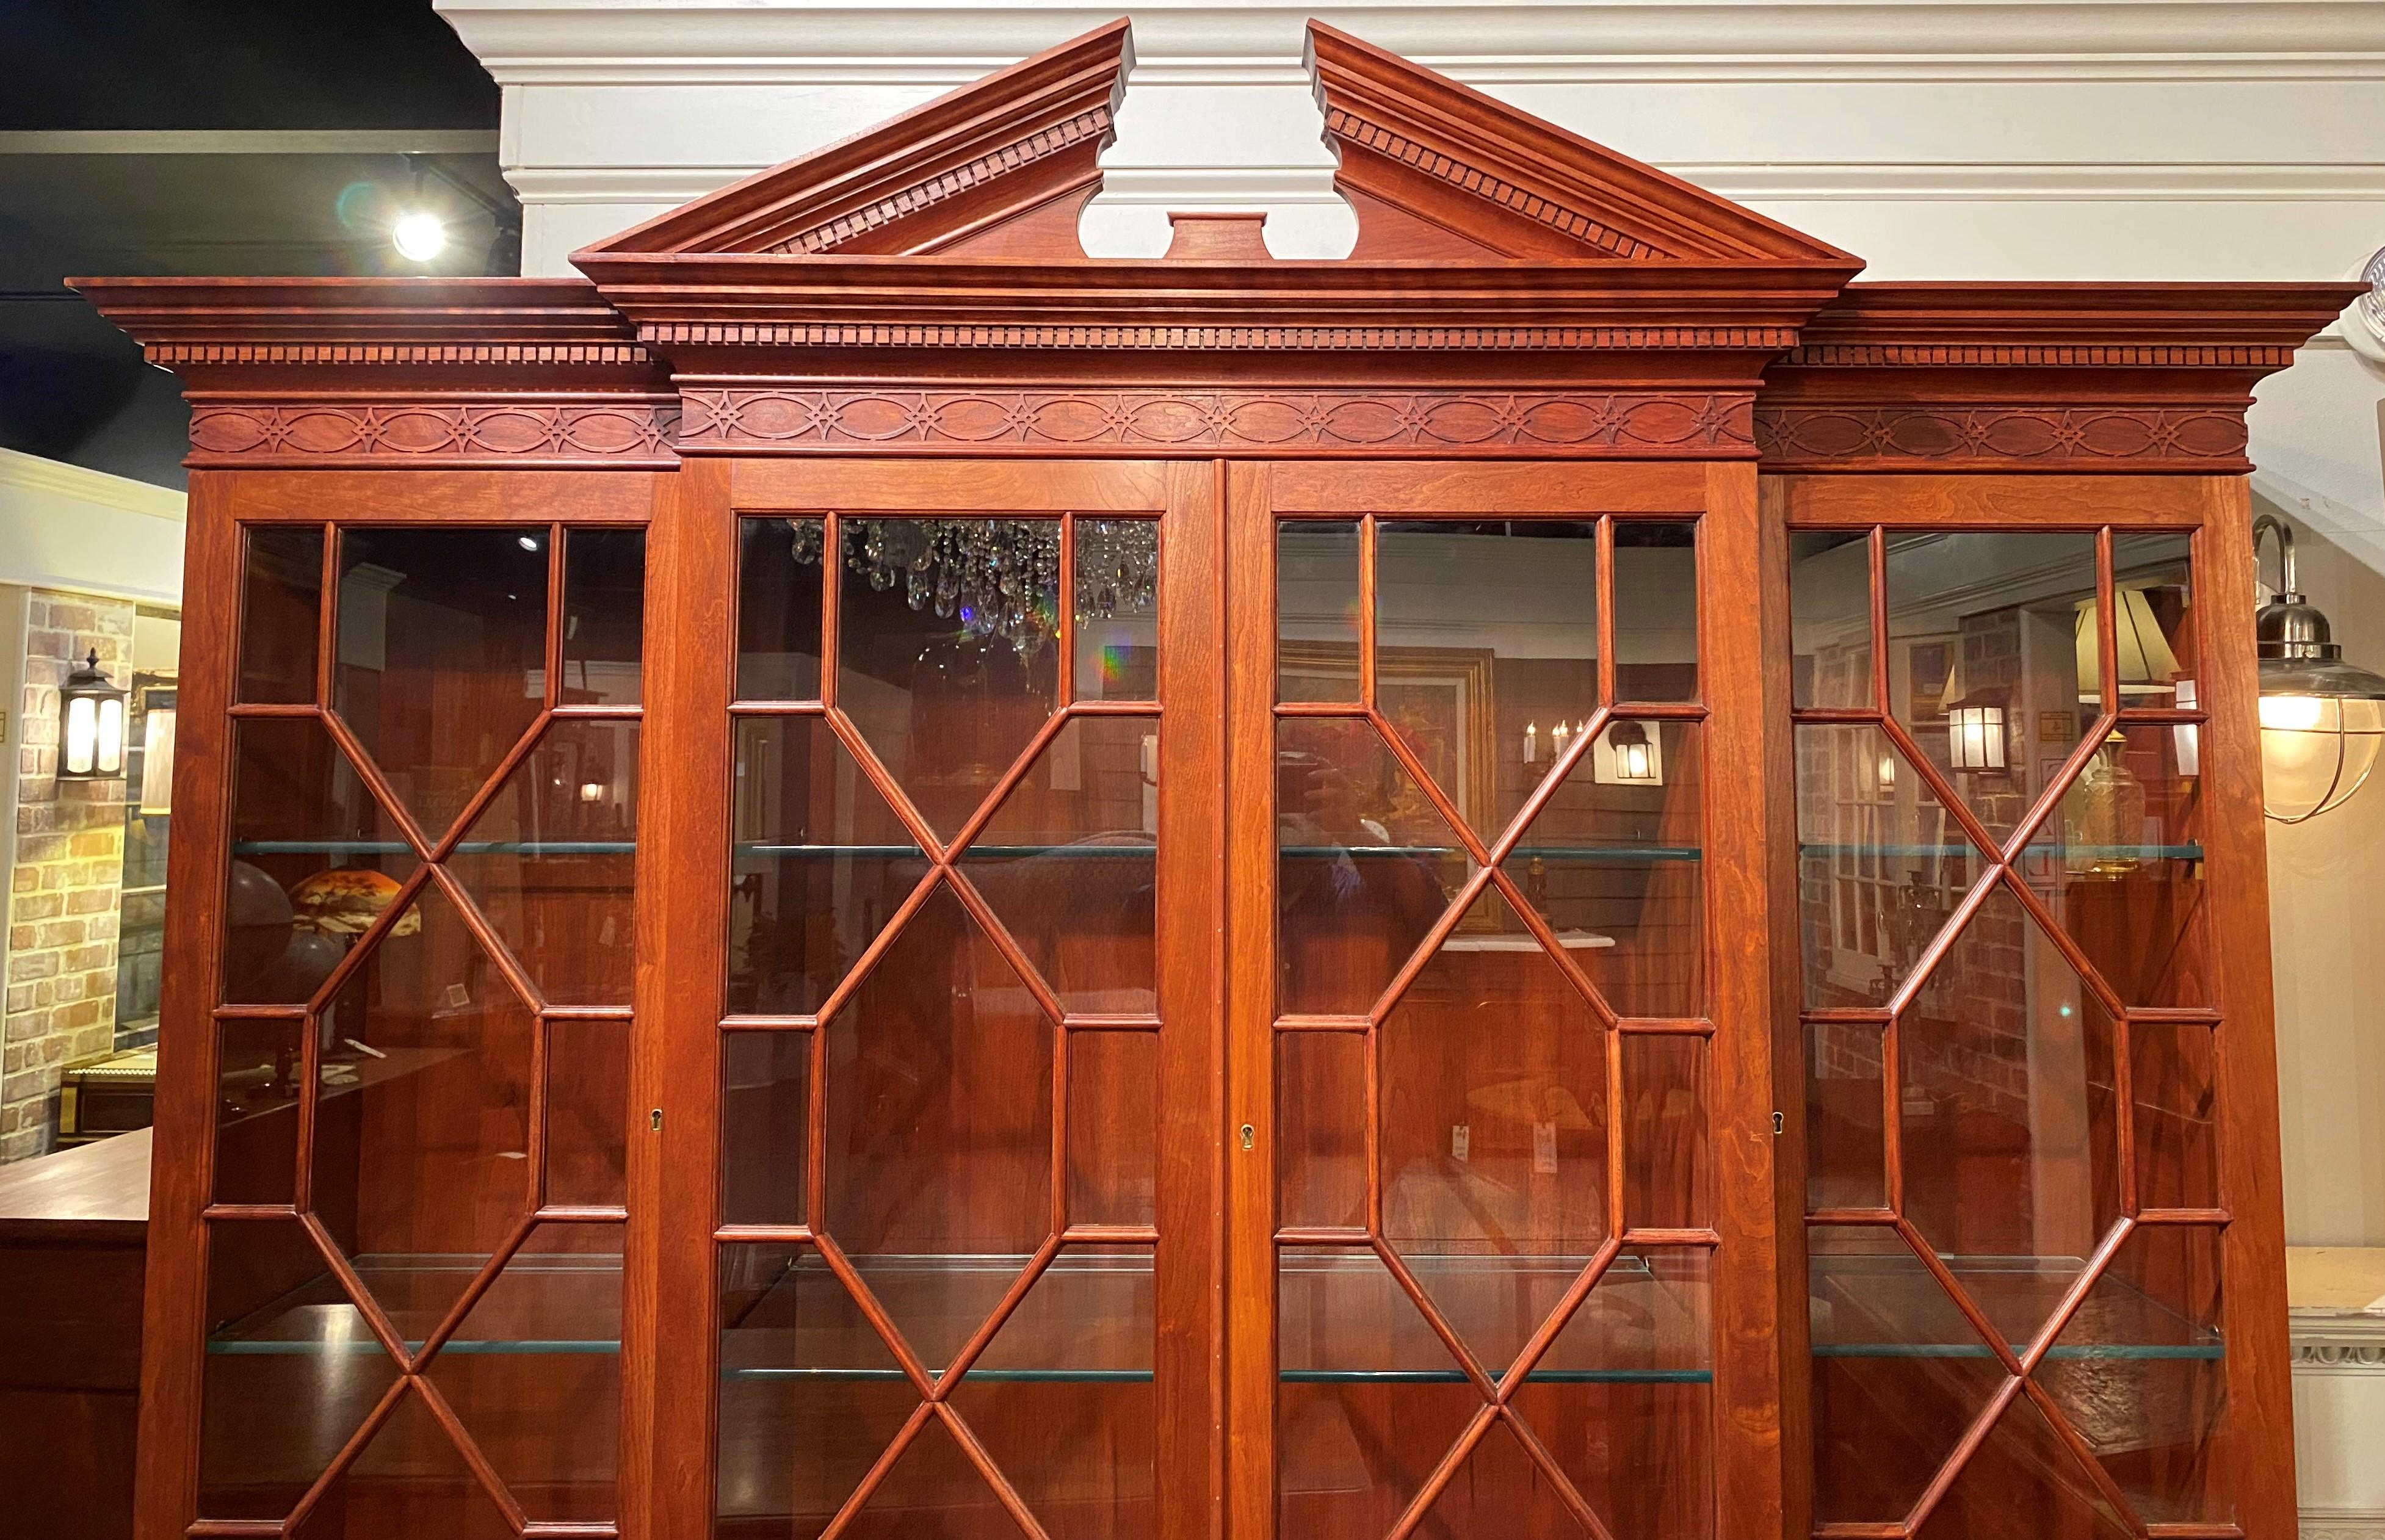 A fine quality Chippendale or Georgian style cherry two piece breakfront china cabinet or bookcase, the upper case featuring a split pediment crest and nicely carved cornice with dentil molding, surmounting four glass doors with fretwork opening to